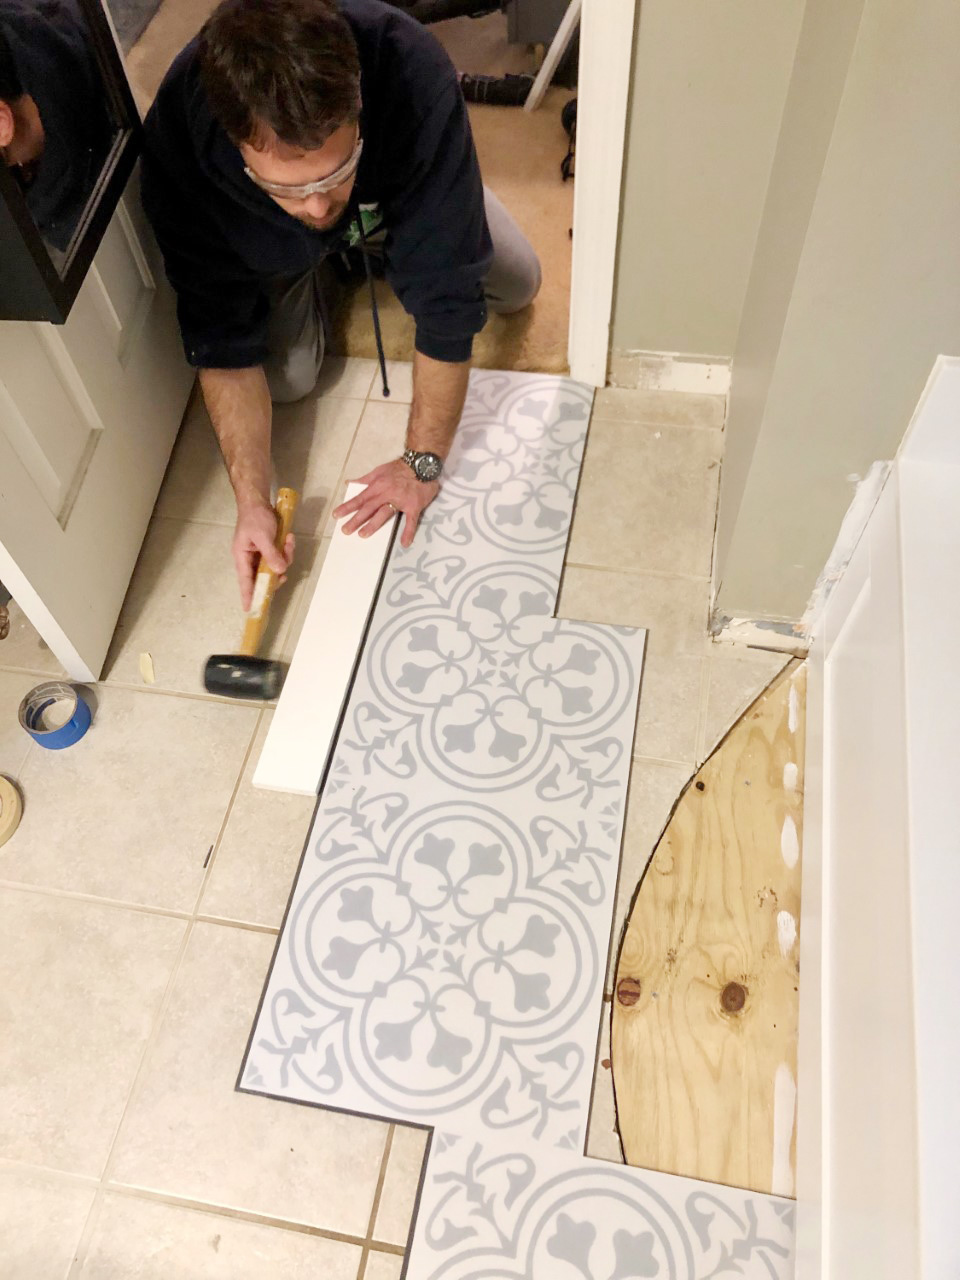 Lvt Flooring Over Existing Tile The, How To Tile Bathroom Floor Over Plywood